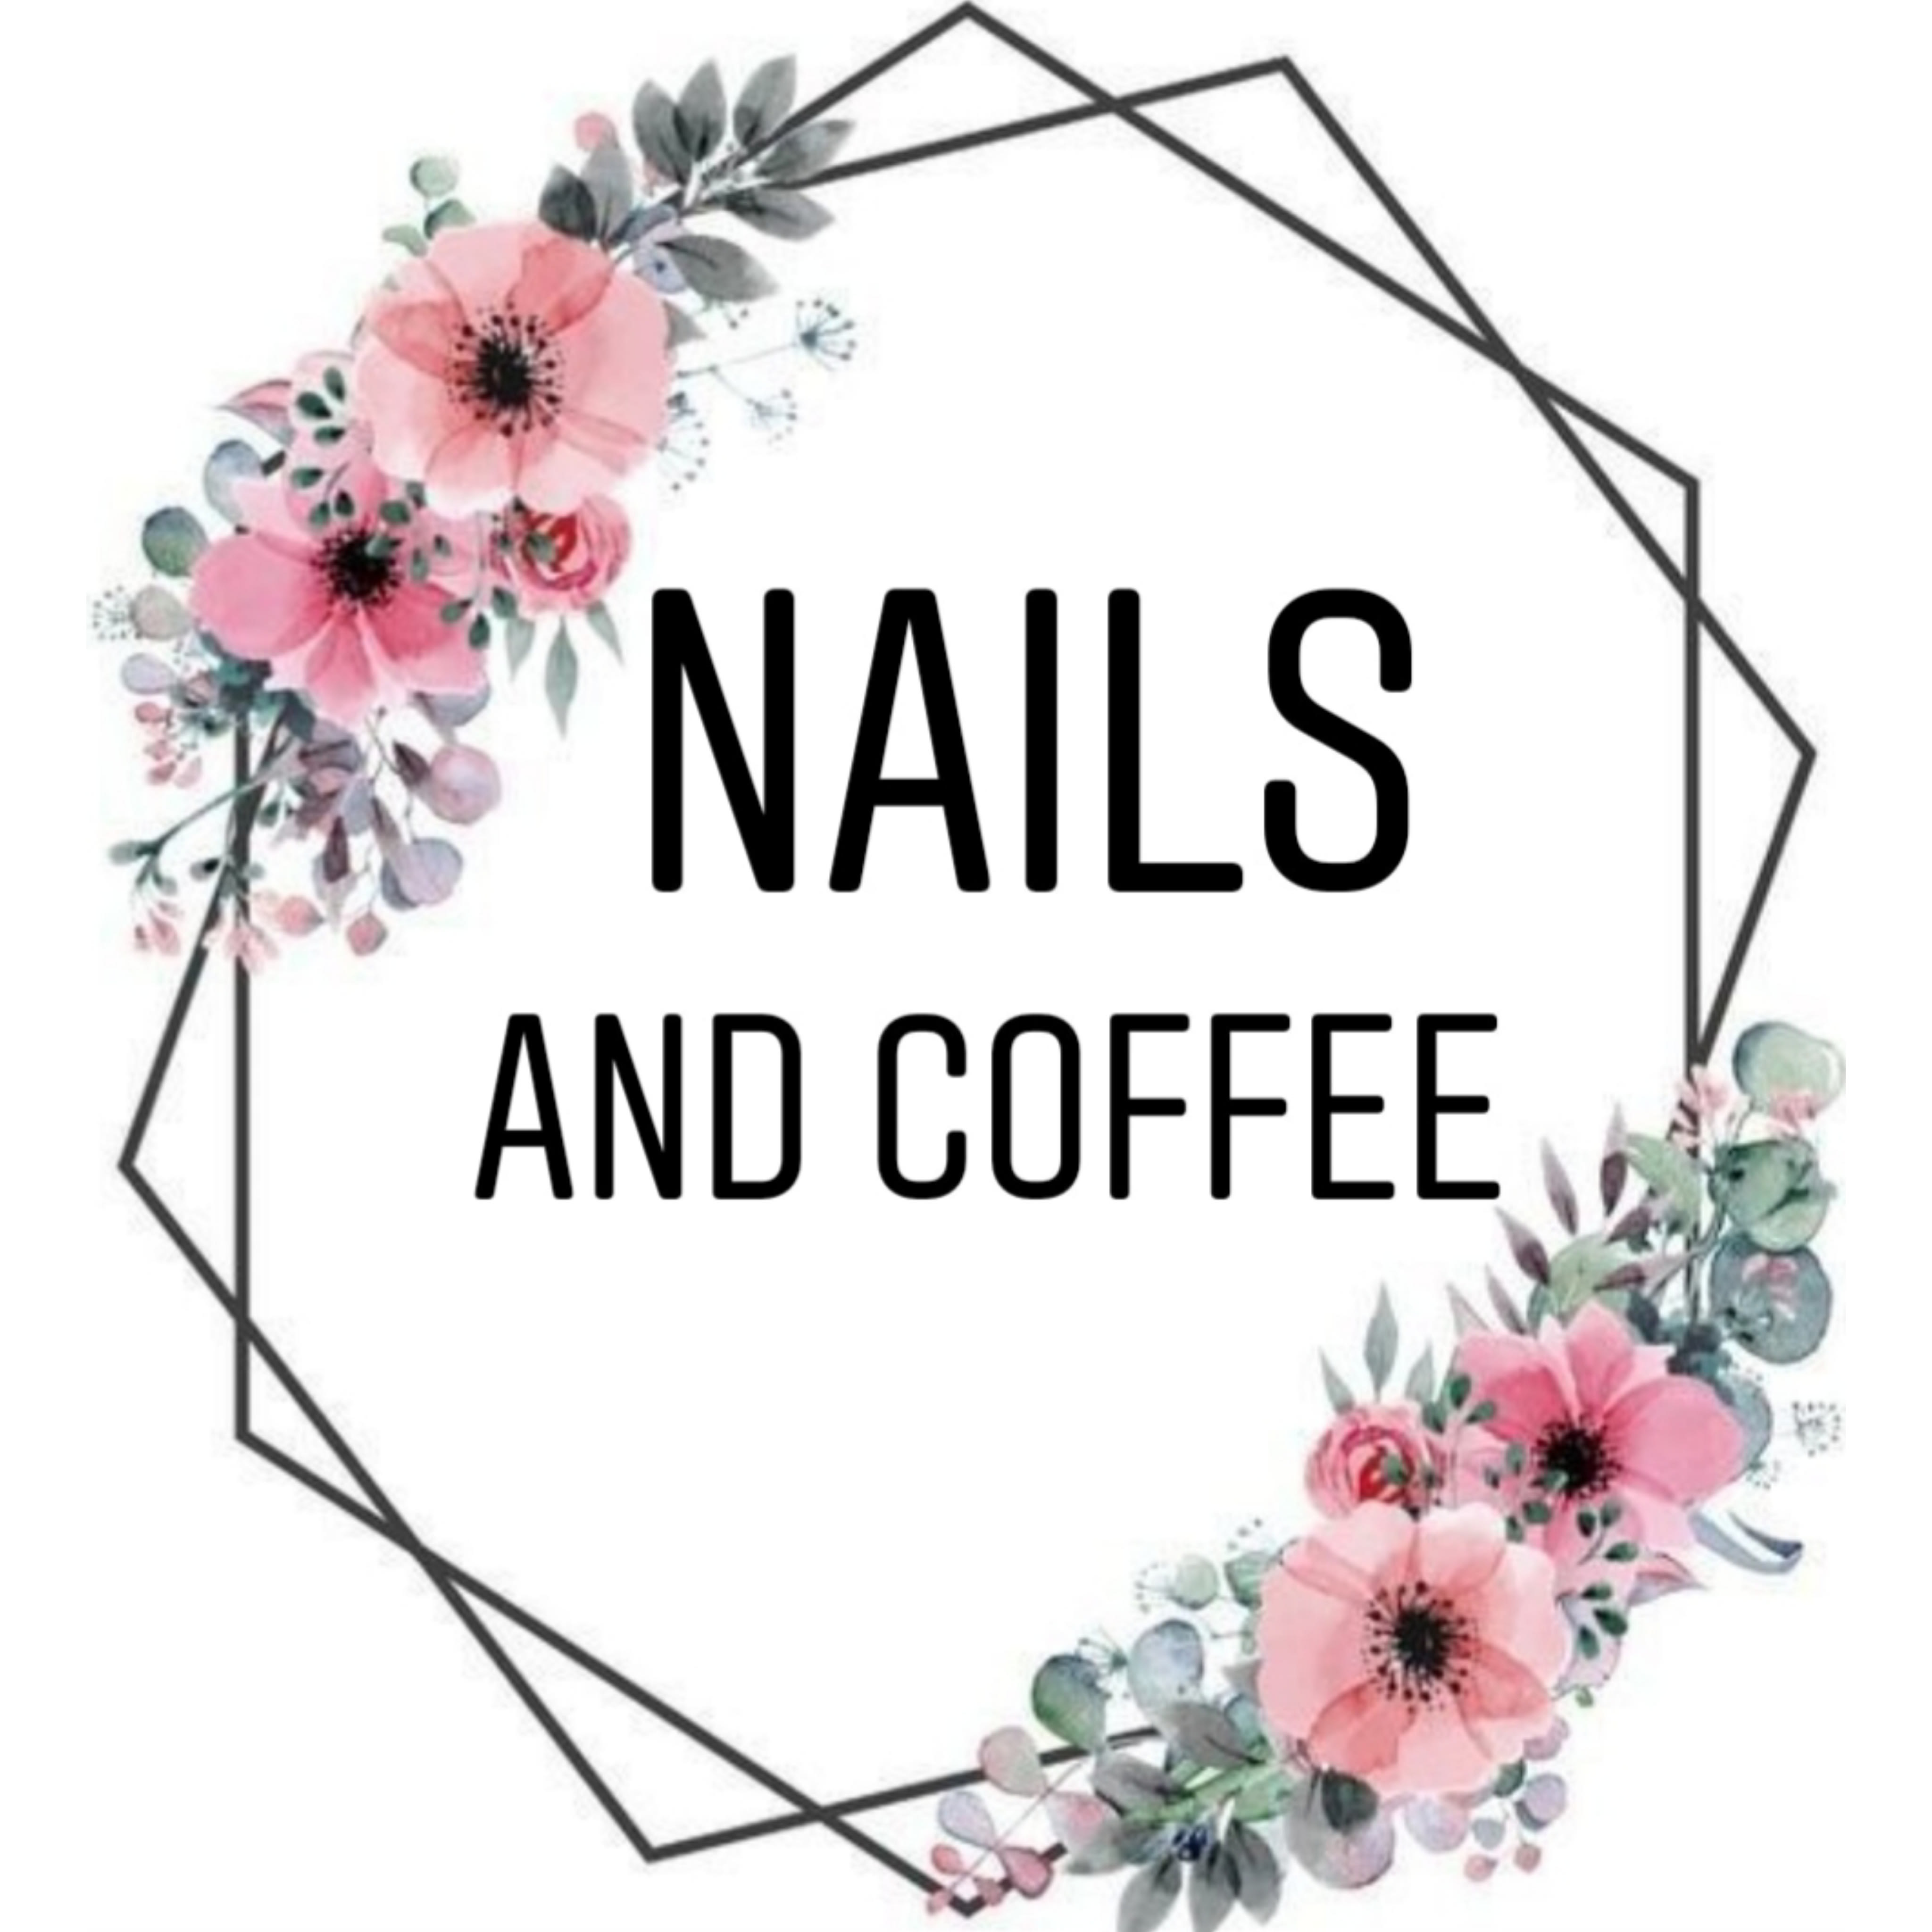 Nails and Coffee